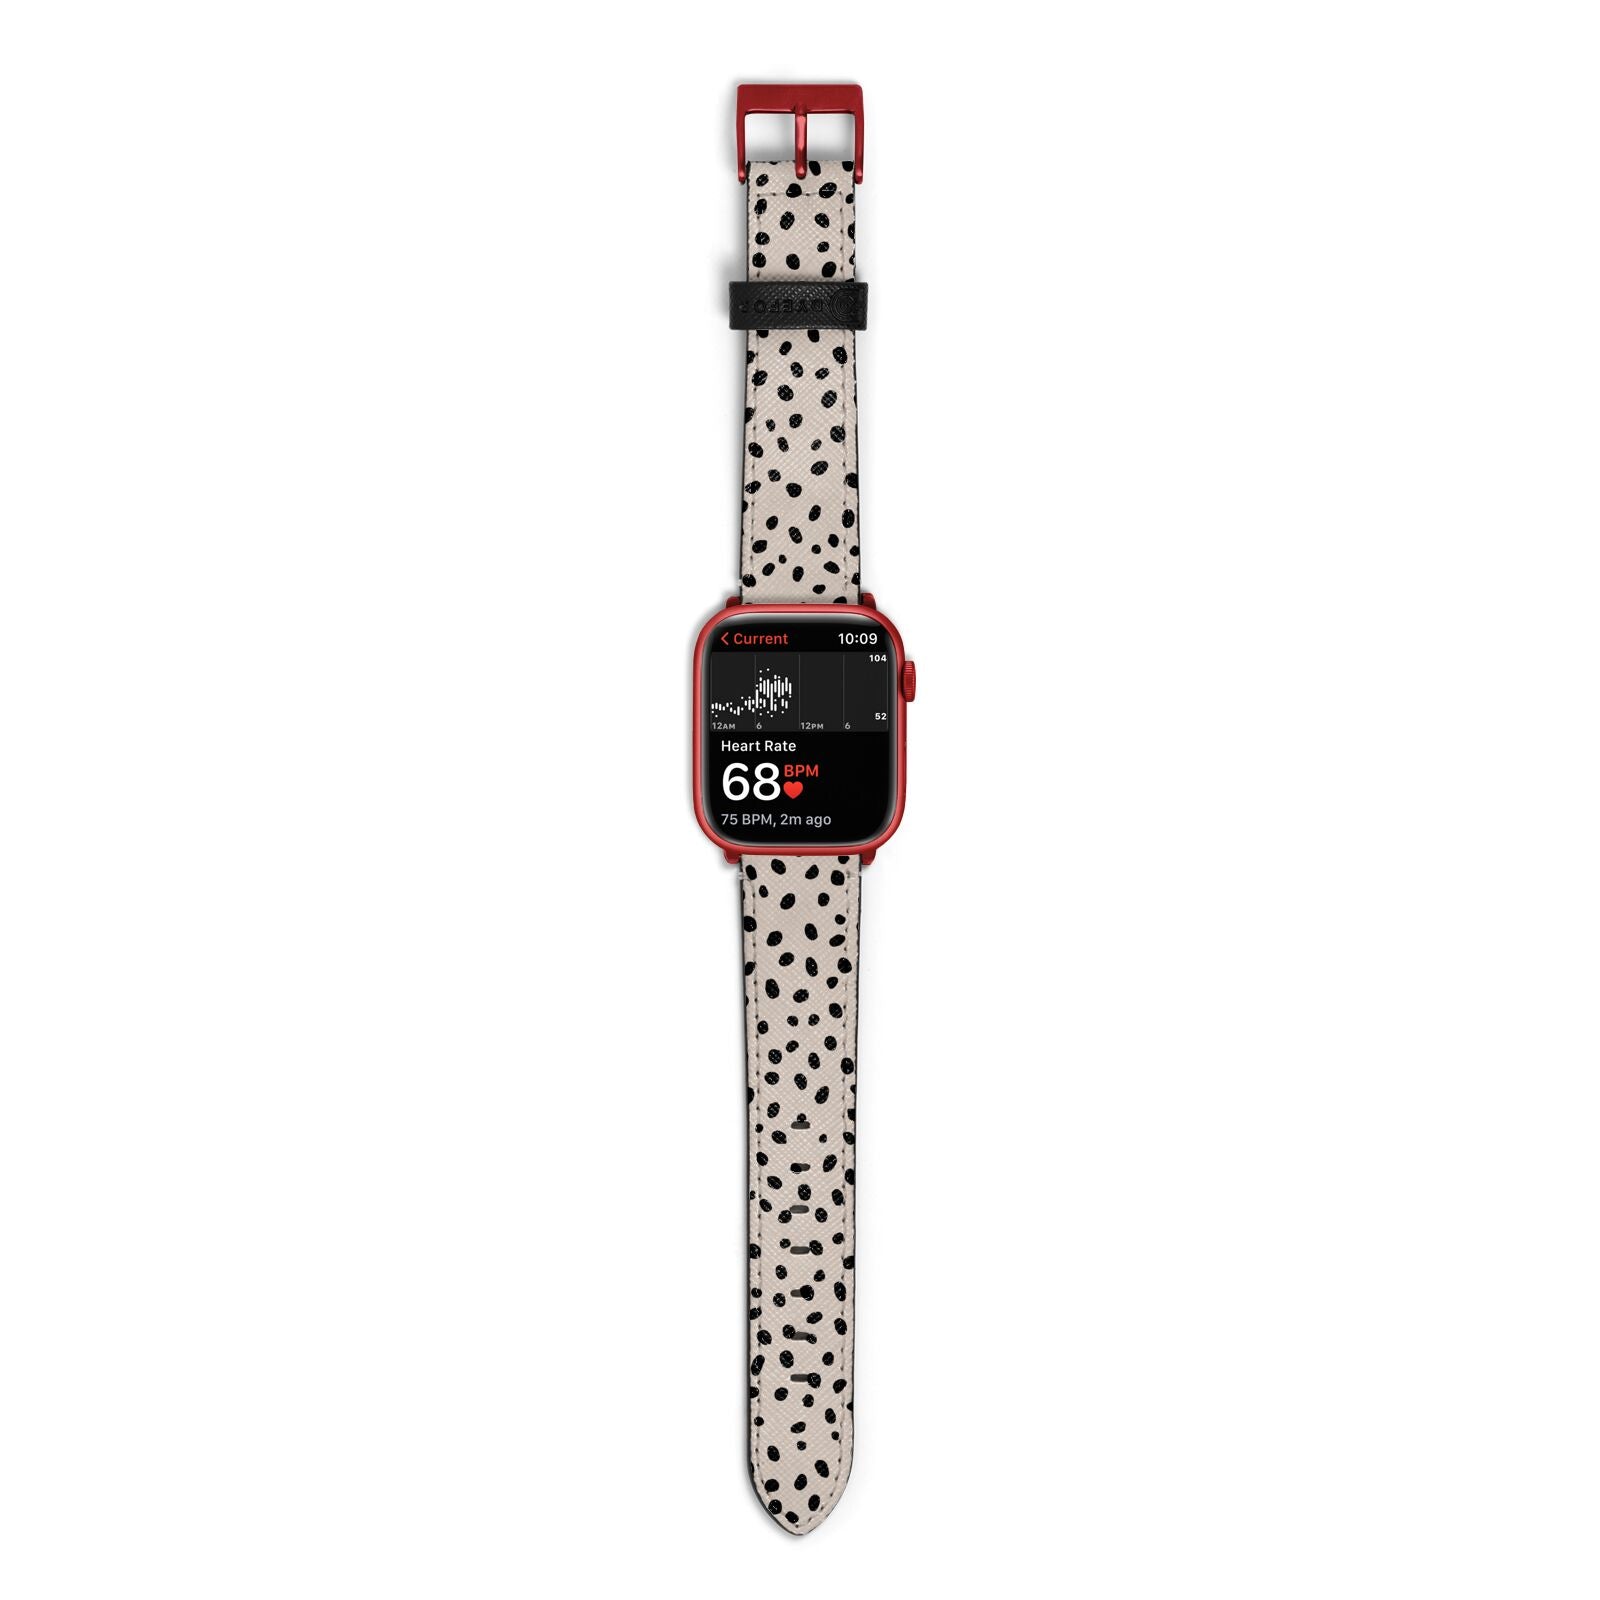 Almond Polka Dot Apple Watch Strap Size 38mm with Red Hardware